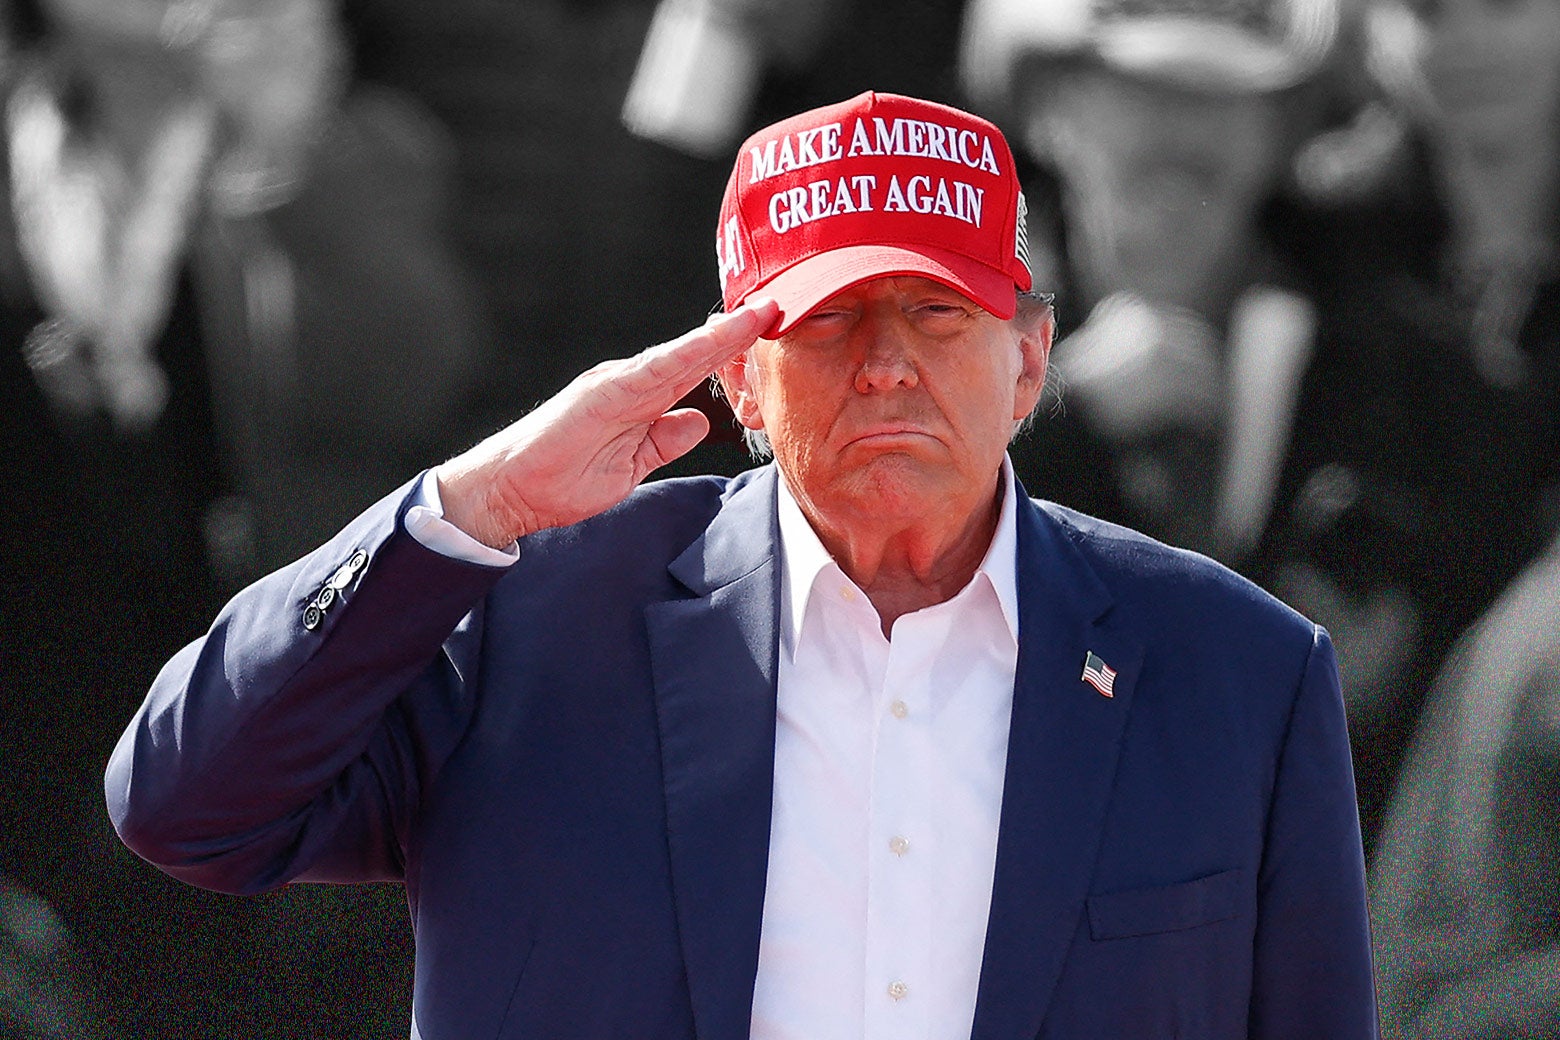 Trump saluting and frowning, in a blue suit with no tie, and a red MAGA hat.